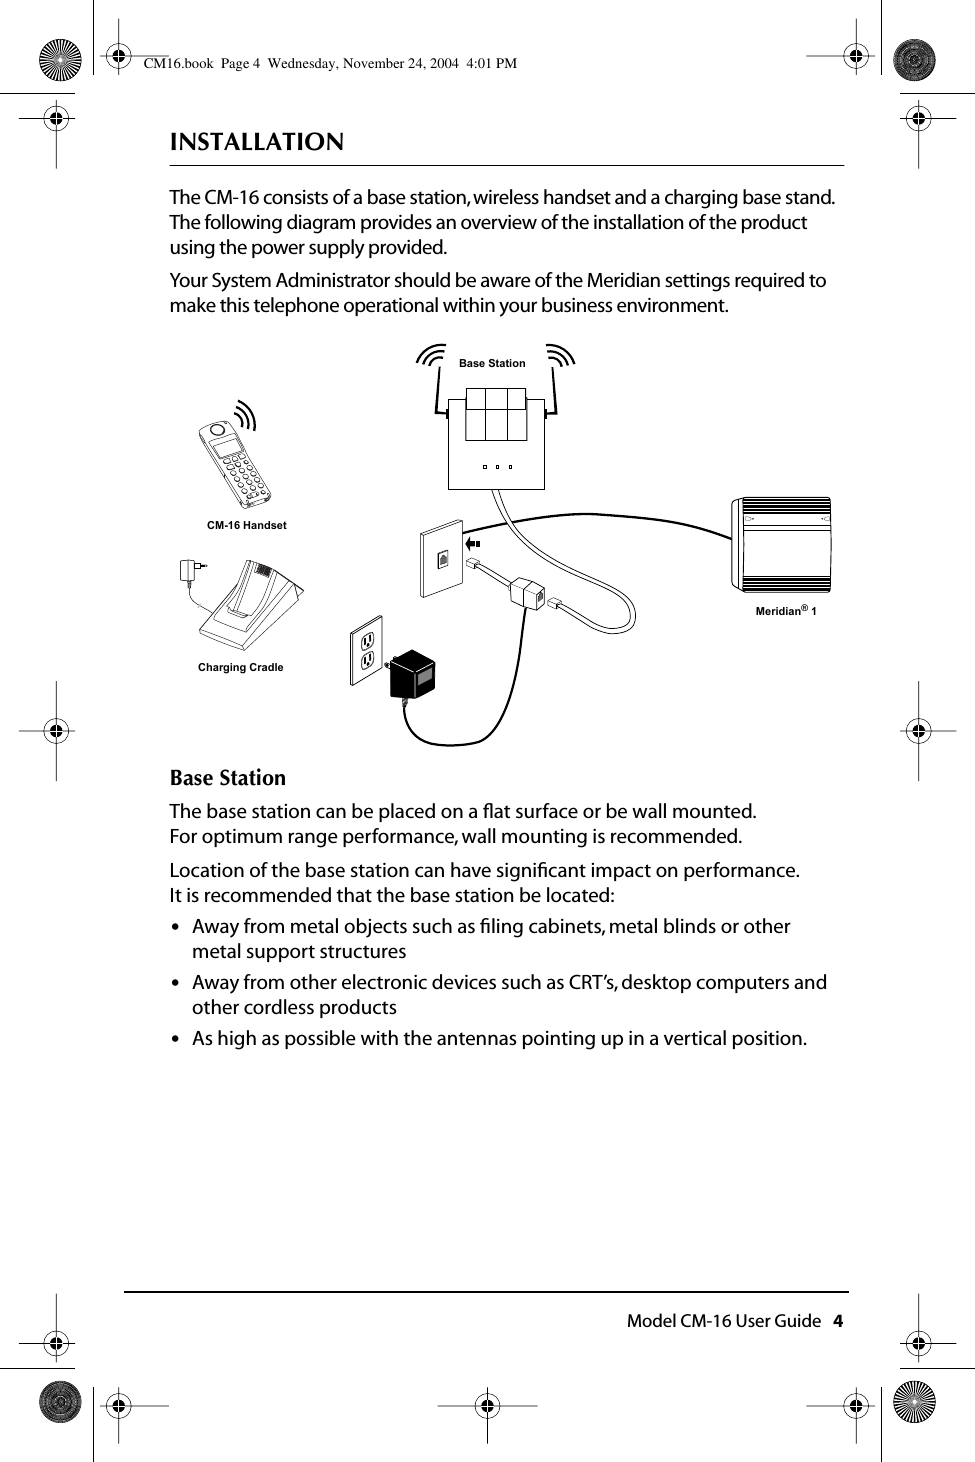  Model CM-16 User Guide   4 INSTALLATION The CM-16 consists of a base station, wireless handset and a charging base stand.  The following diagram provides an overview of the installation of the product using the power supply provided.Your System Administrator should be aware of the Meridian settings required to make this telephone operational within your business environment. Base Station The base station can be placed on a ﬂat surface or be wall mounted.  For optimum range performance, wall mounting is recommended.  Location of the base station can have signiﬁcant impact on performance. It is recommended that the base station be located: • Away from metal objects such as ﬁling cabinets, metal blinds or other metal support structures • Away from other electronic devices such as CRT’s, desktop computers and other cordless products • As high as possible with the antennas pointing up in a vertical position.CM-16 HandsetCharging CradleMeridian® 1Base Station CM16.book  Page 4  Wednesday, November 24, 2004  4:01 PM